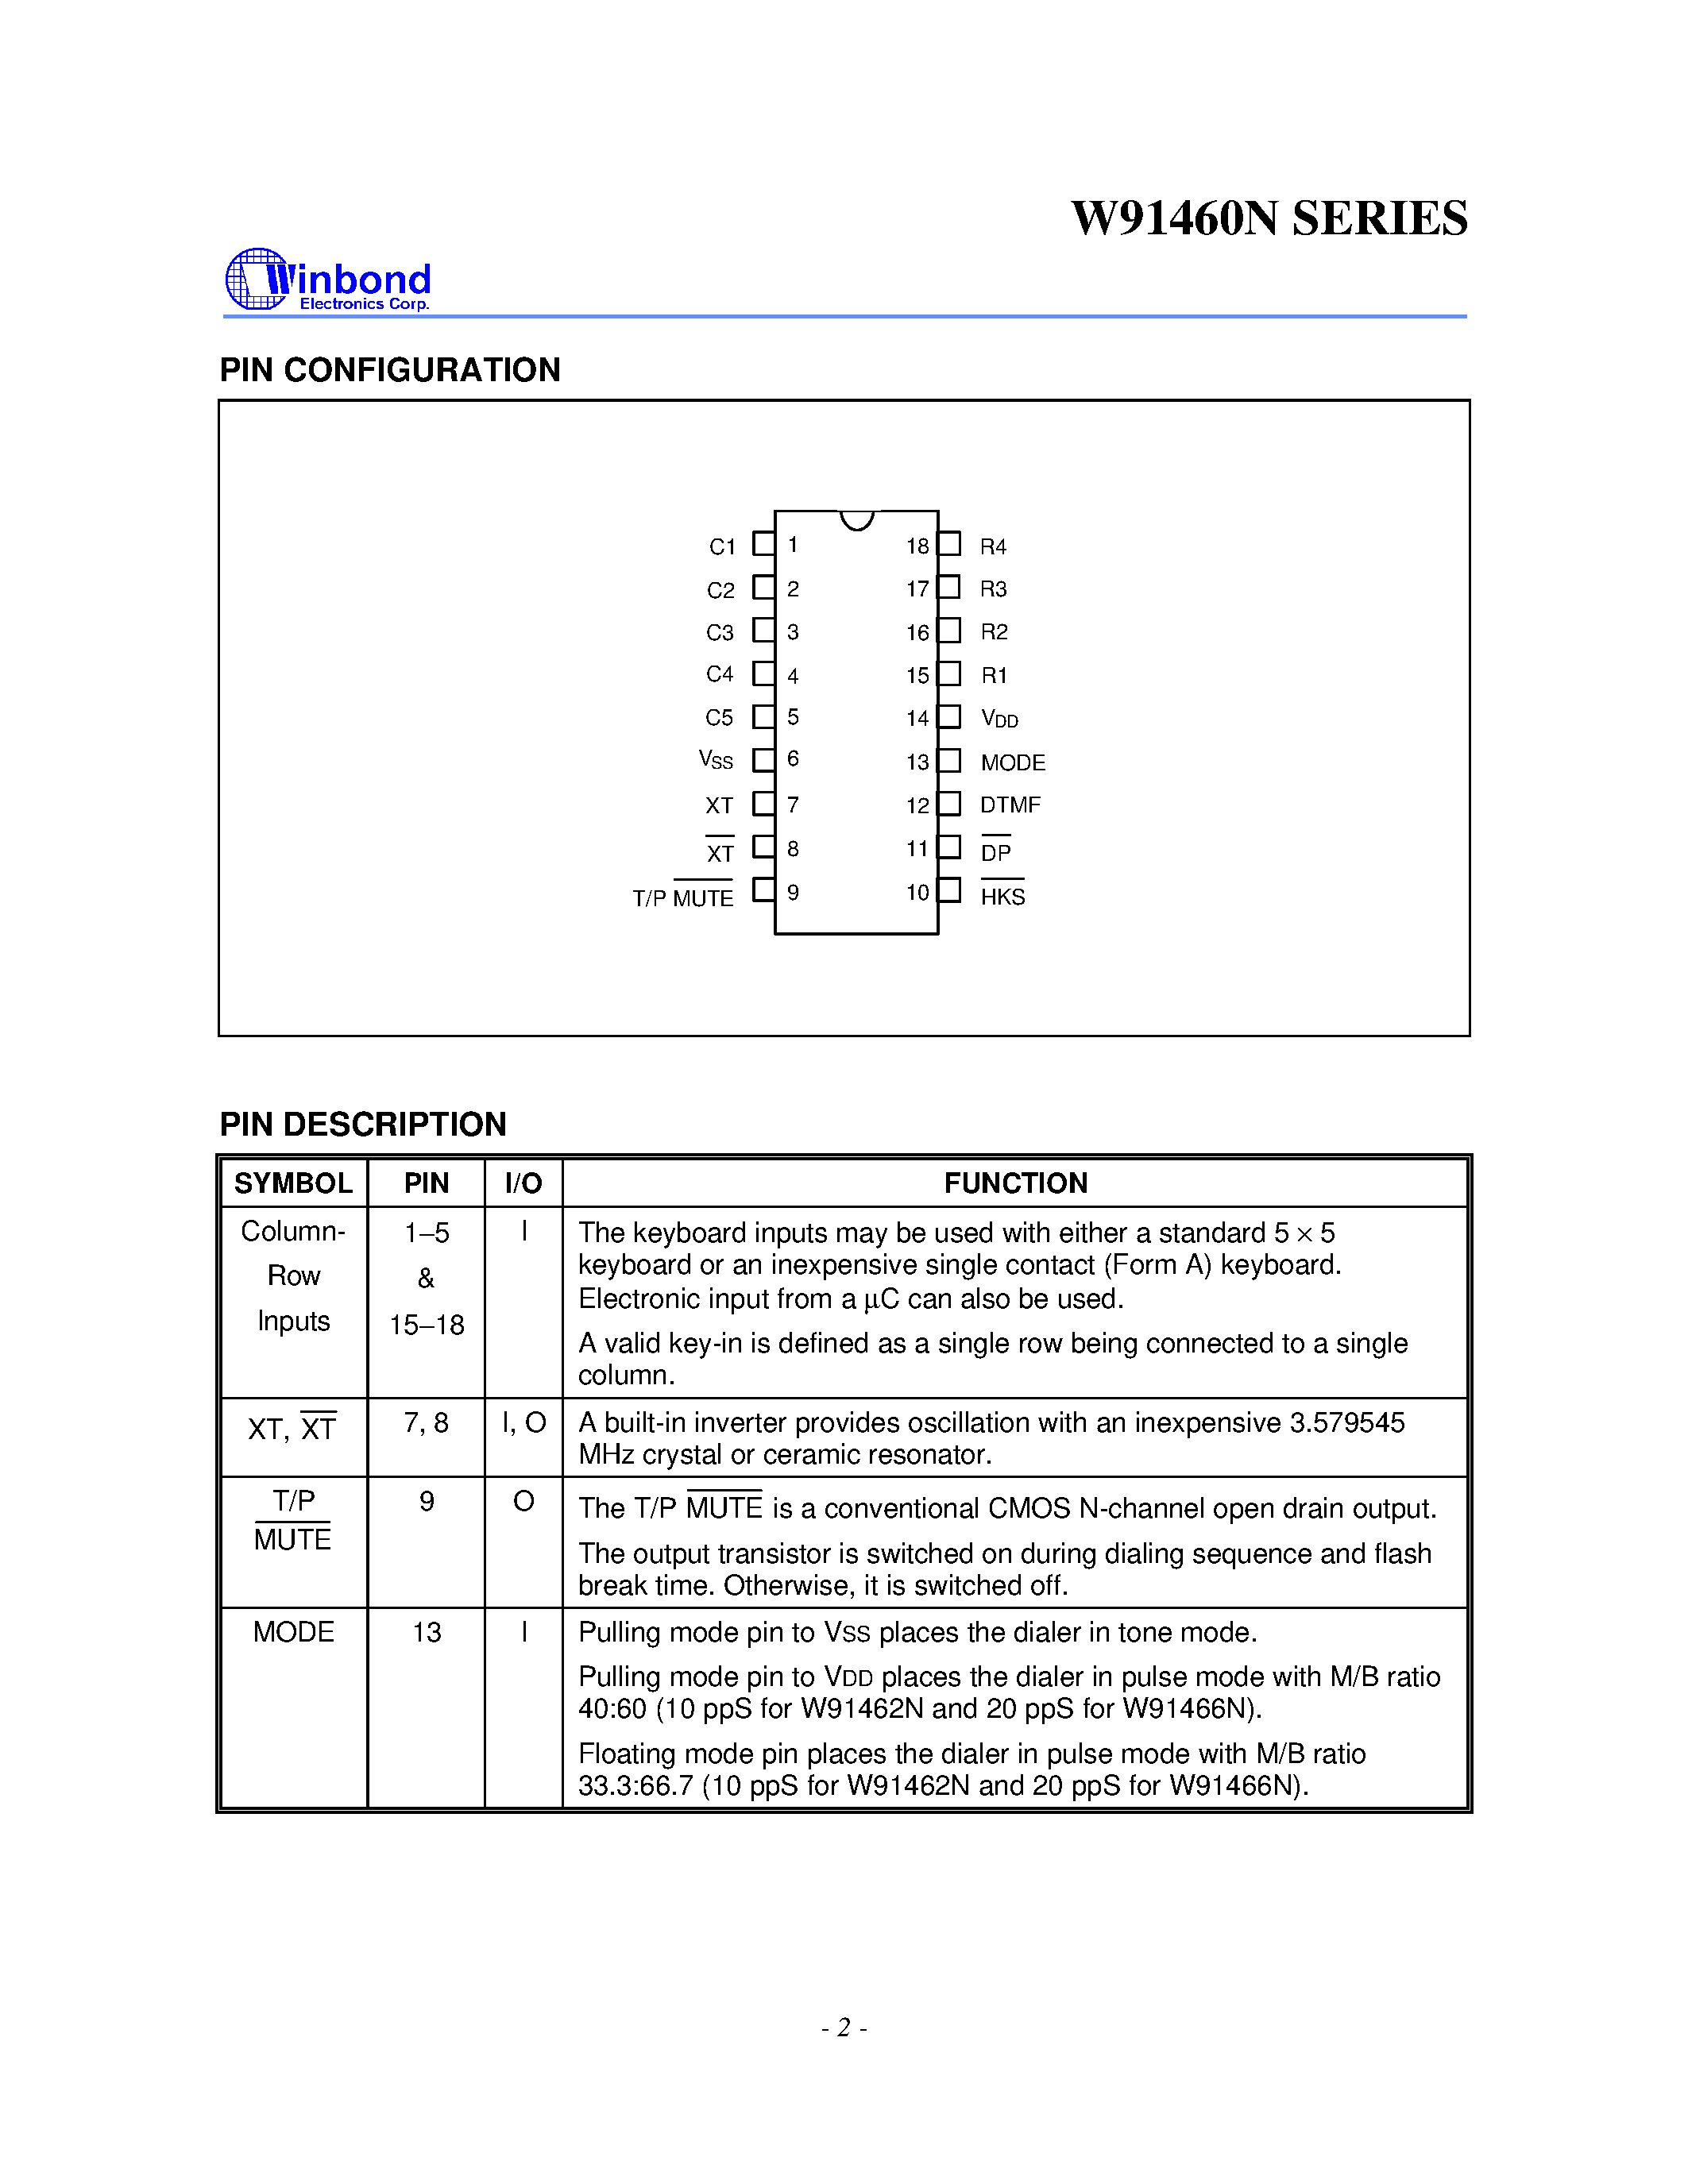 Datasheet W91462N - 3-MEMORY TONE/PULSE DIALER WITH SAVE FUNCTION page 2